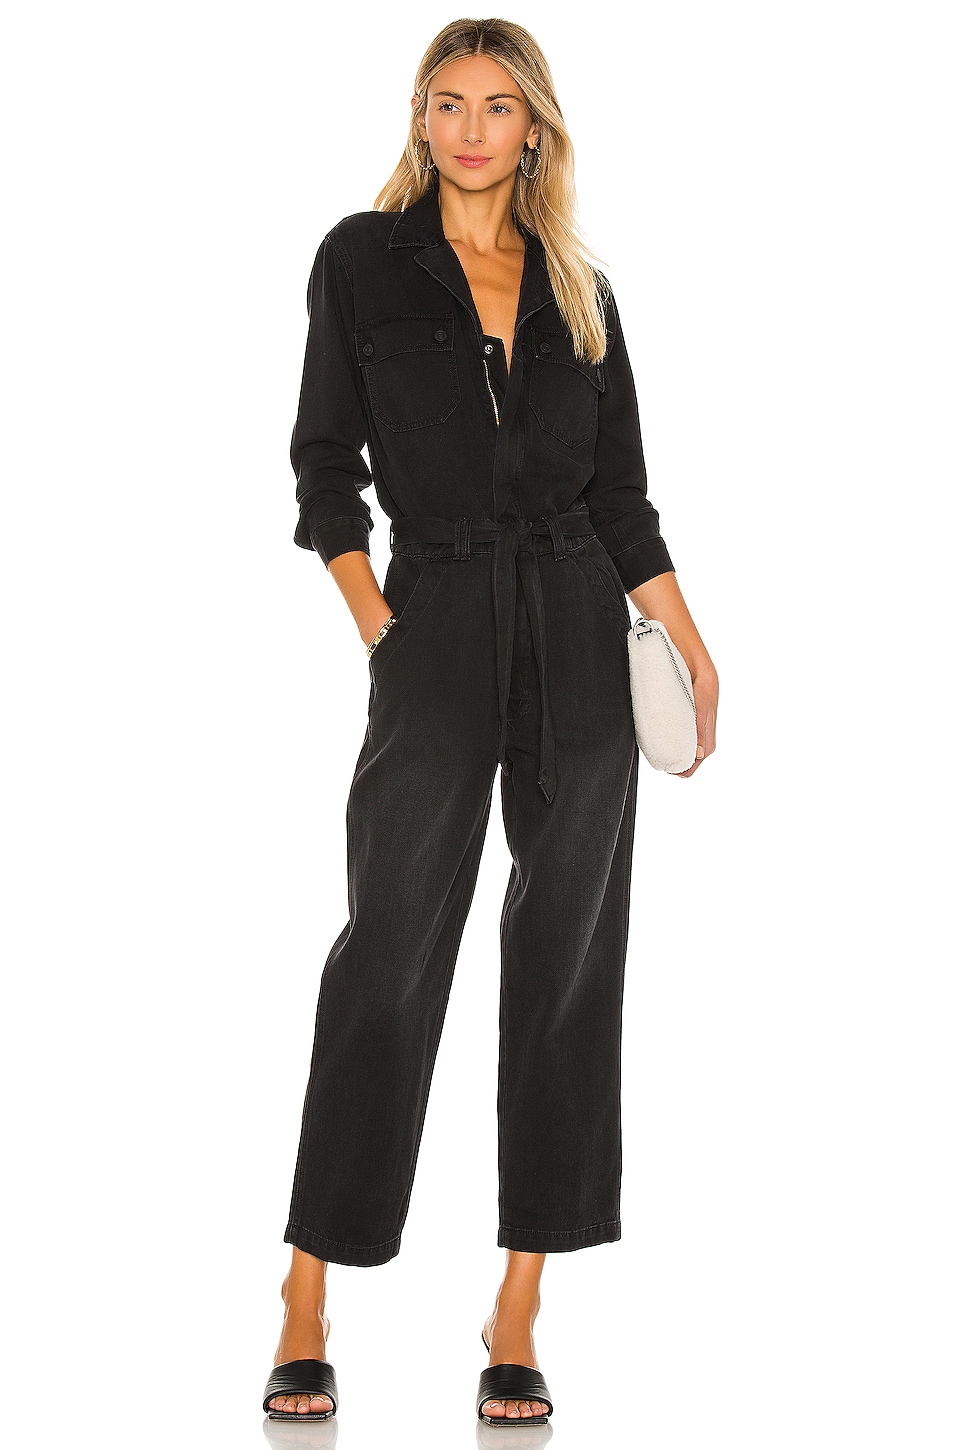 MOTHER The Belted Fixer Jumpsuit in Blackout | REVOLVE